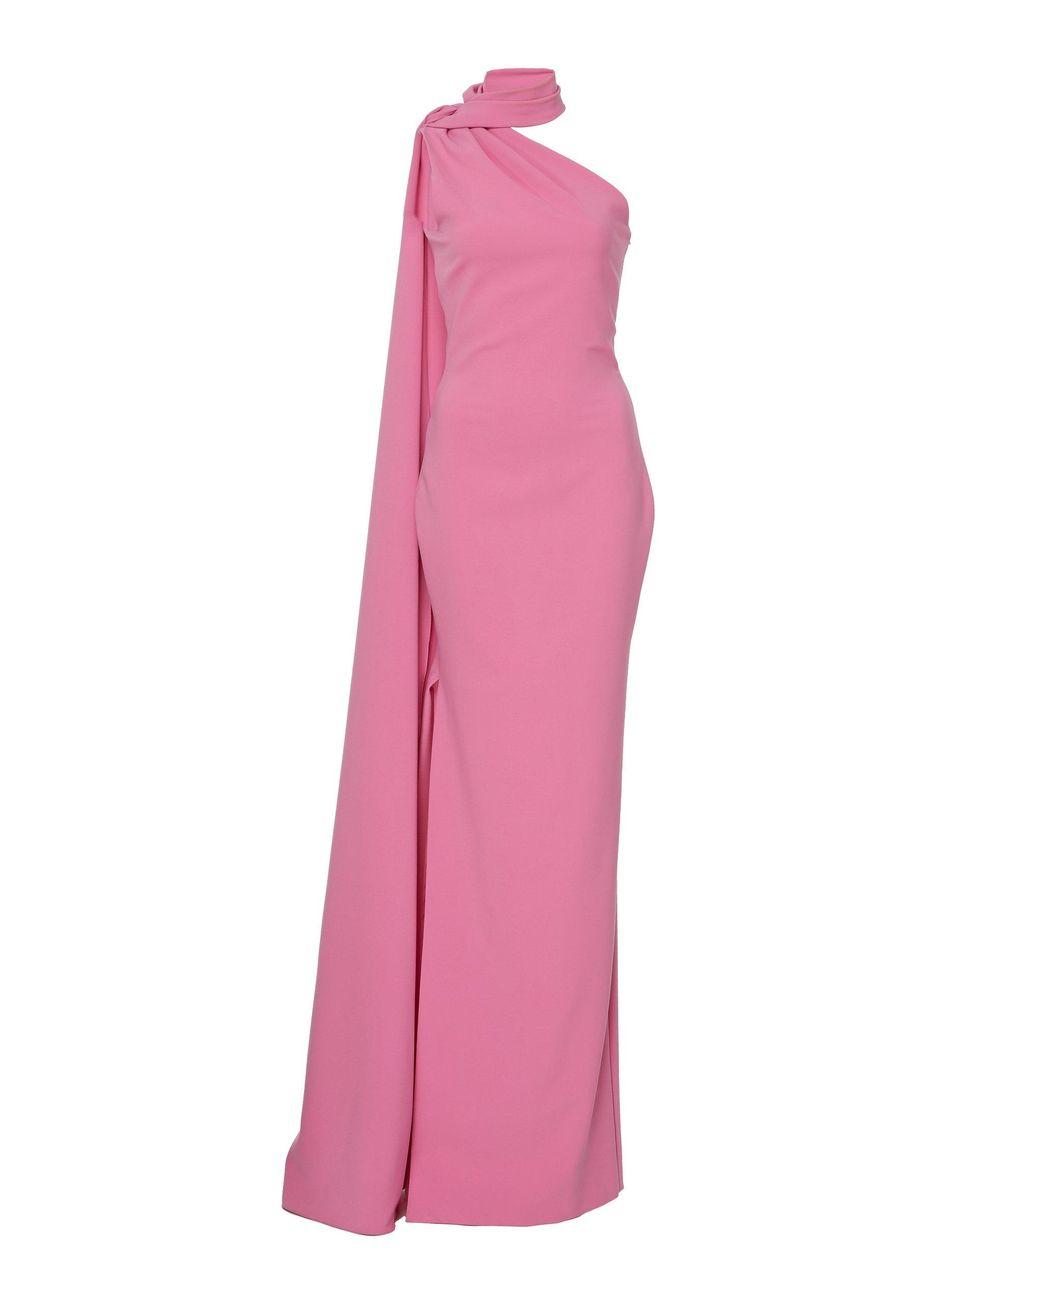 Brandon Maxwell Synthetic Asymmetric Sash Gown in Pink | Lyst